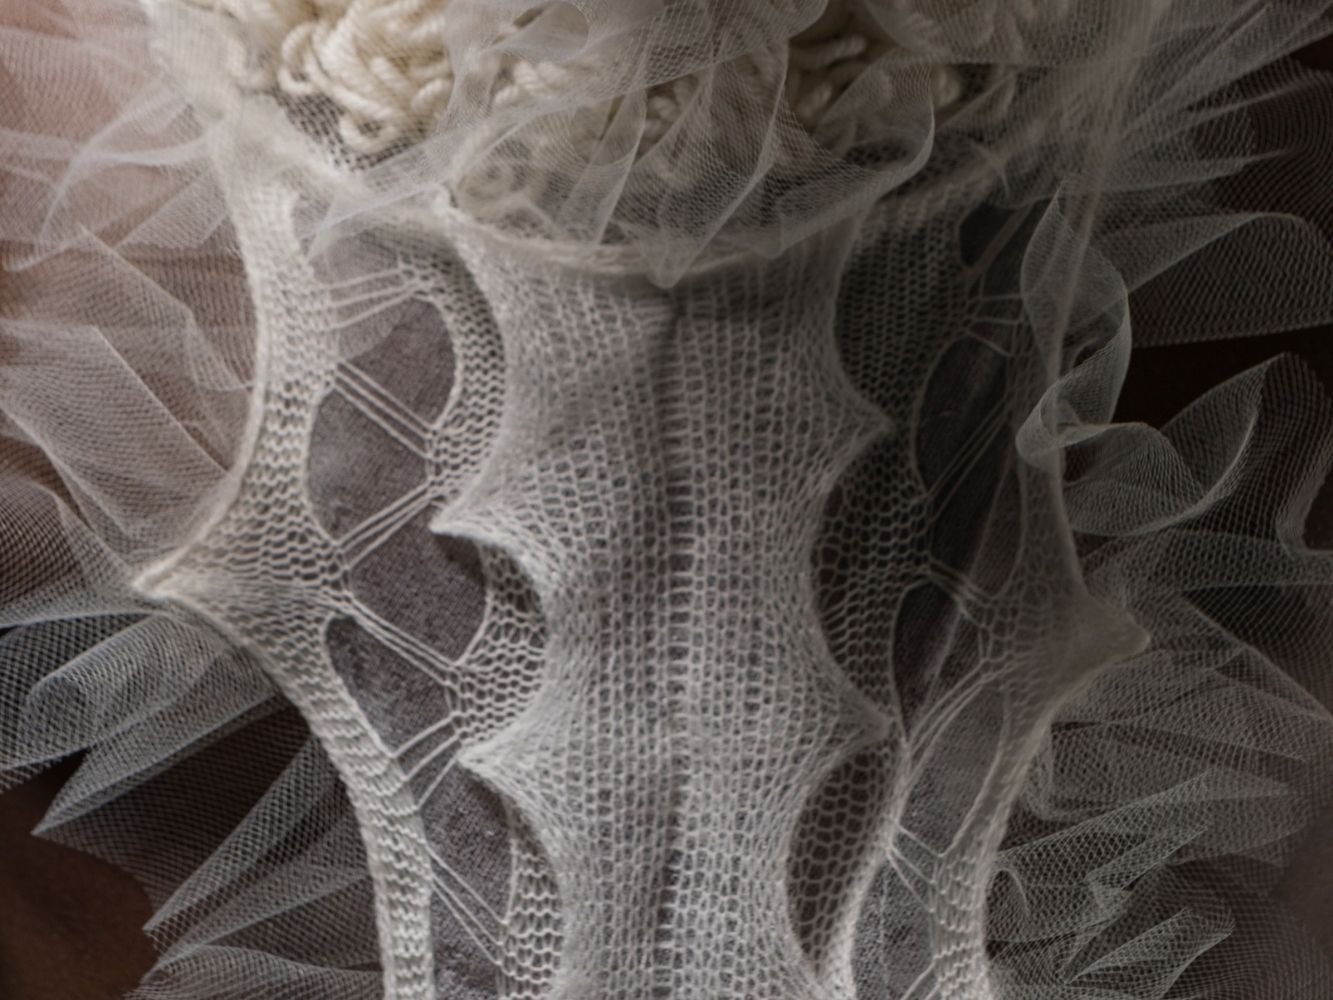 Close up of knitted clothing item designed to look like a marine organism